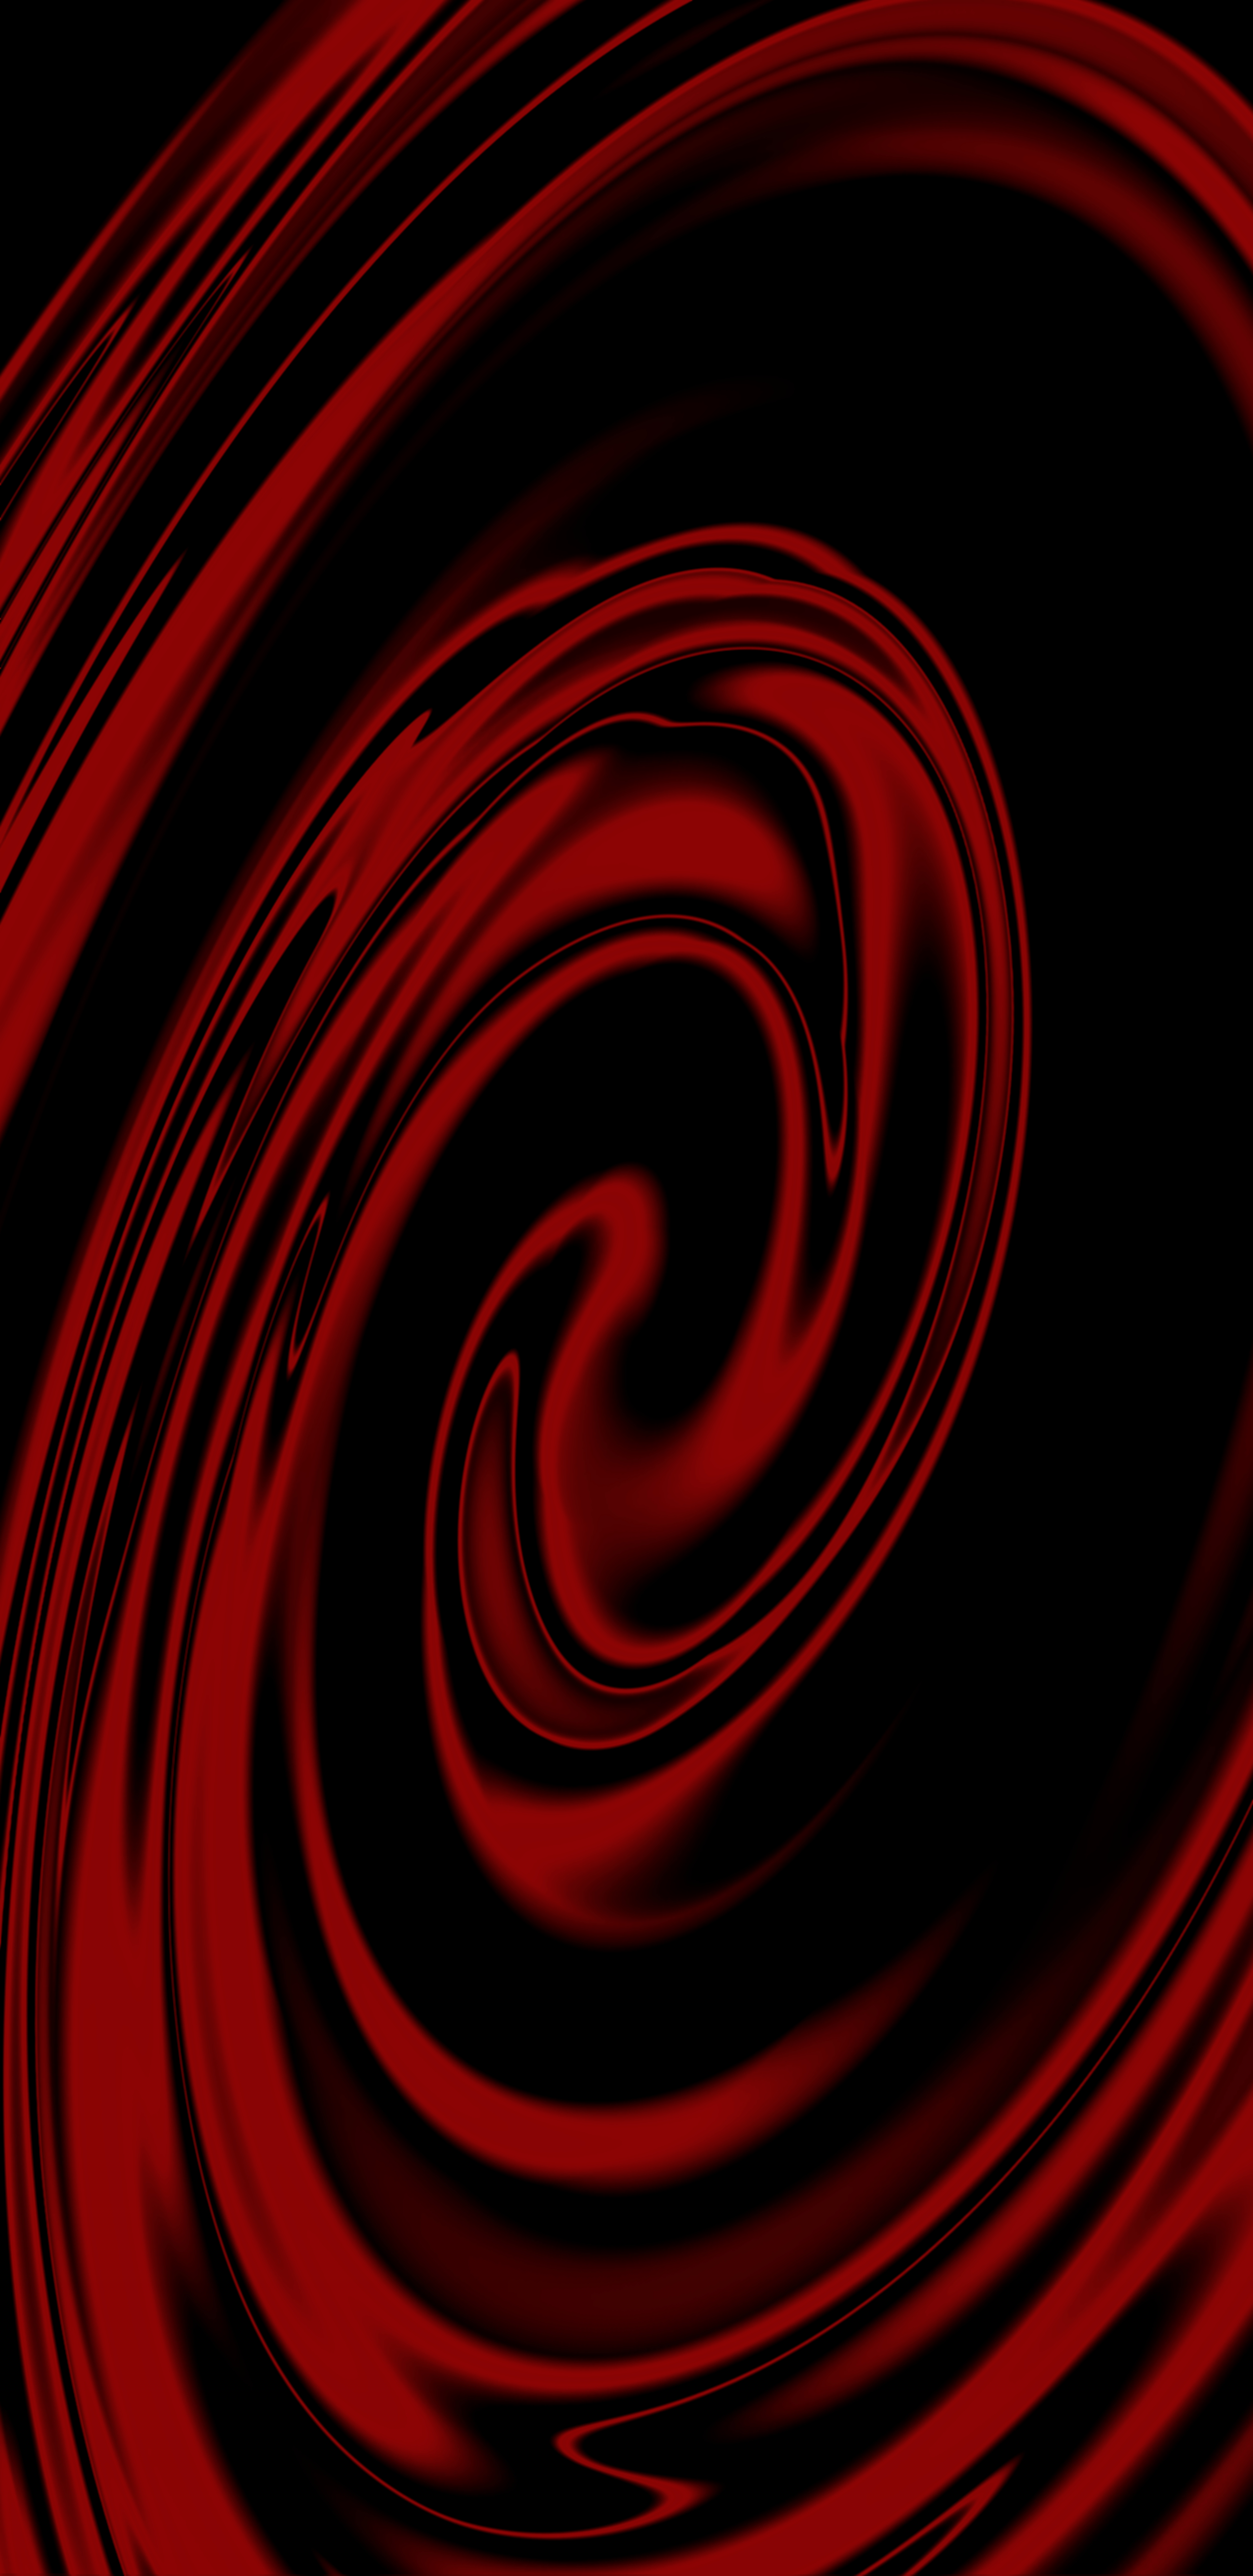 involute, abstract, black, red, spiral, swirling wallpapers for tablet